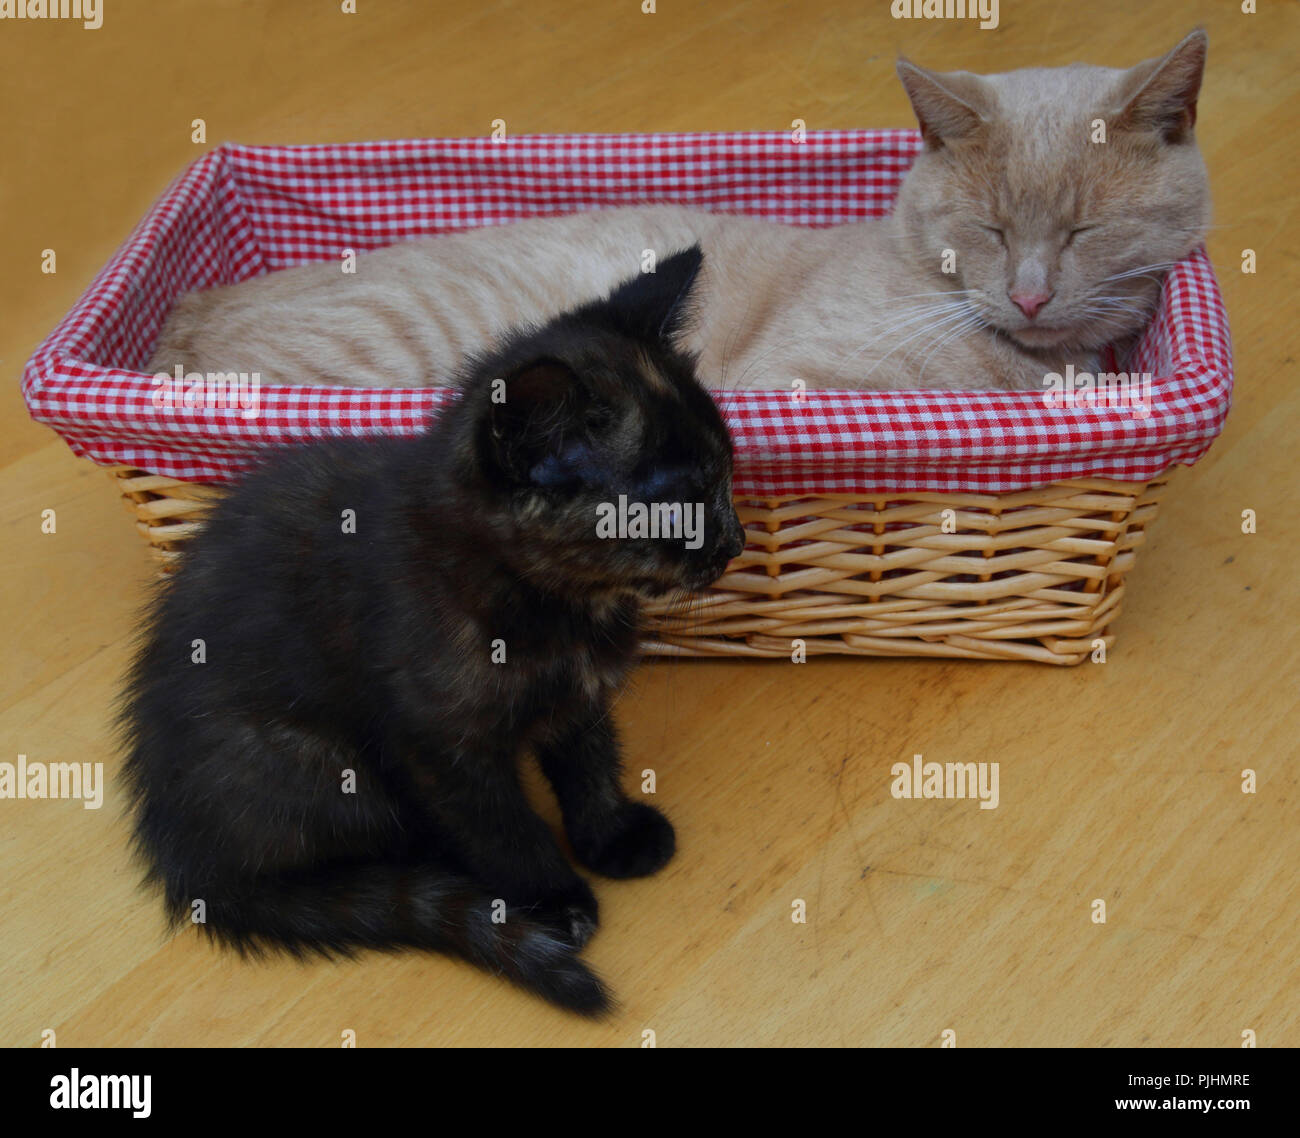 Ginger Tom Cat Sleeping in Basket with Tortoiseshell Kitten Sitting by the side (Father and Daughter) Stock Photo